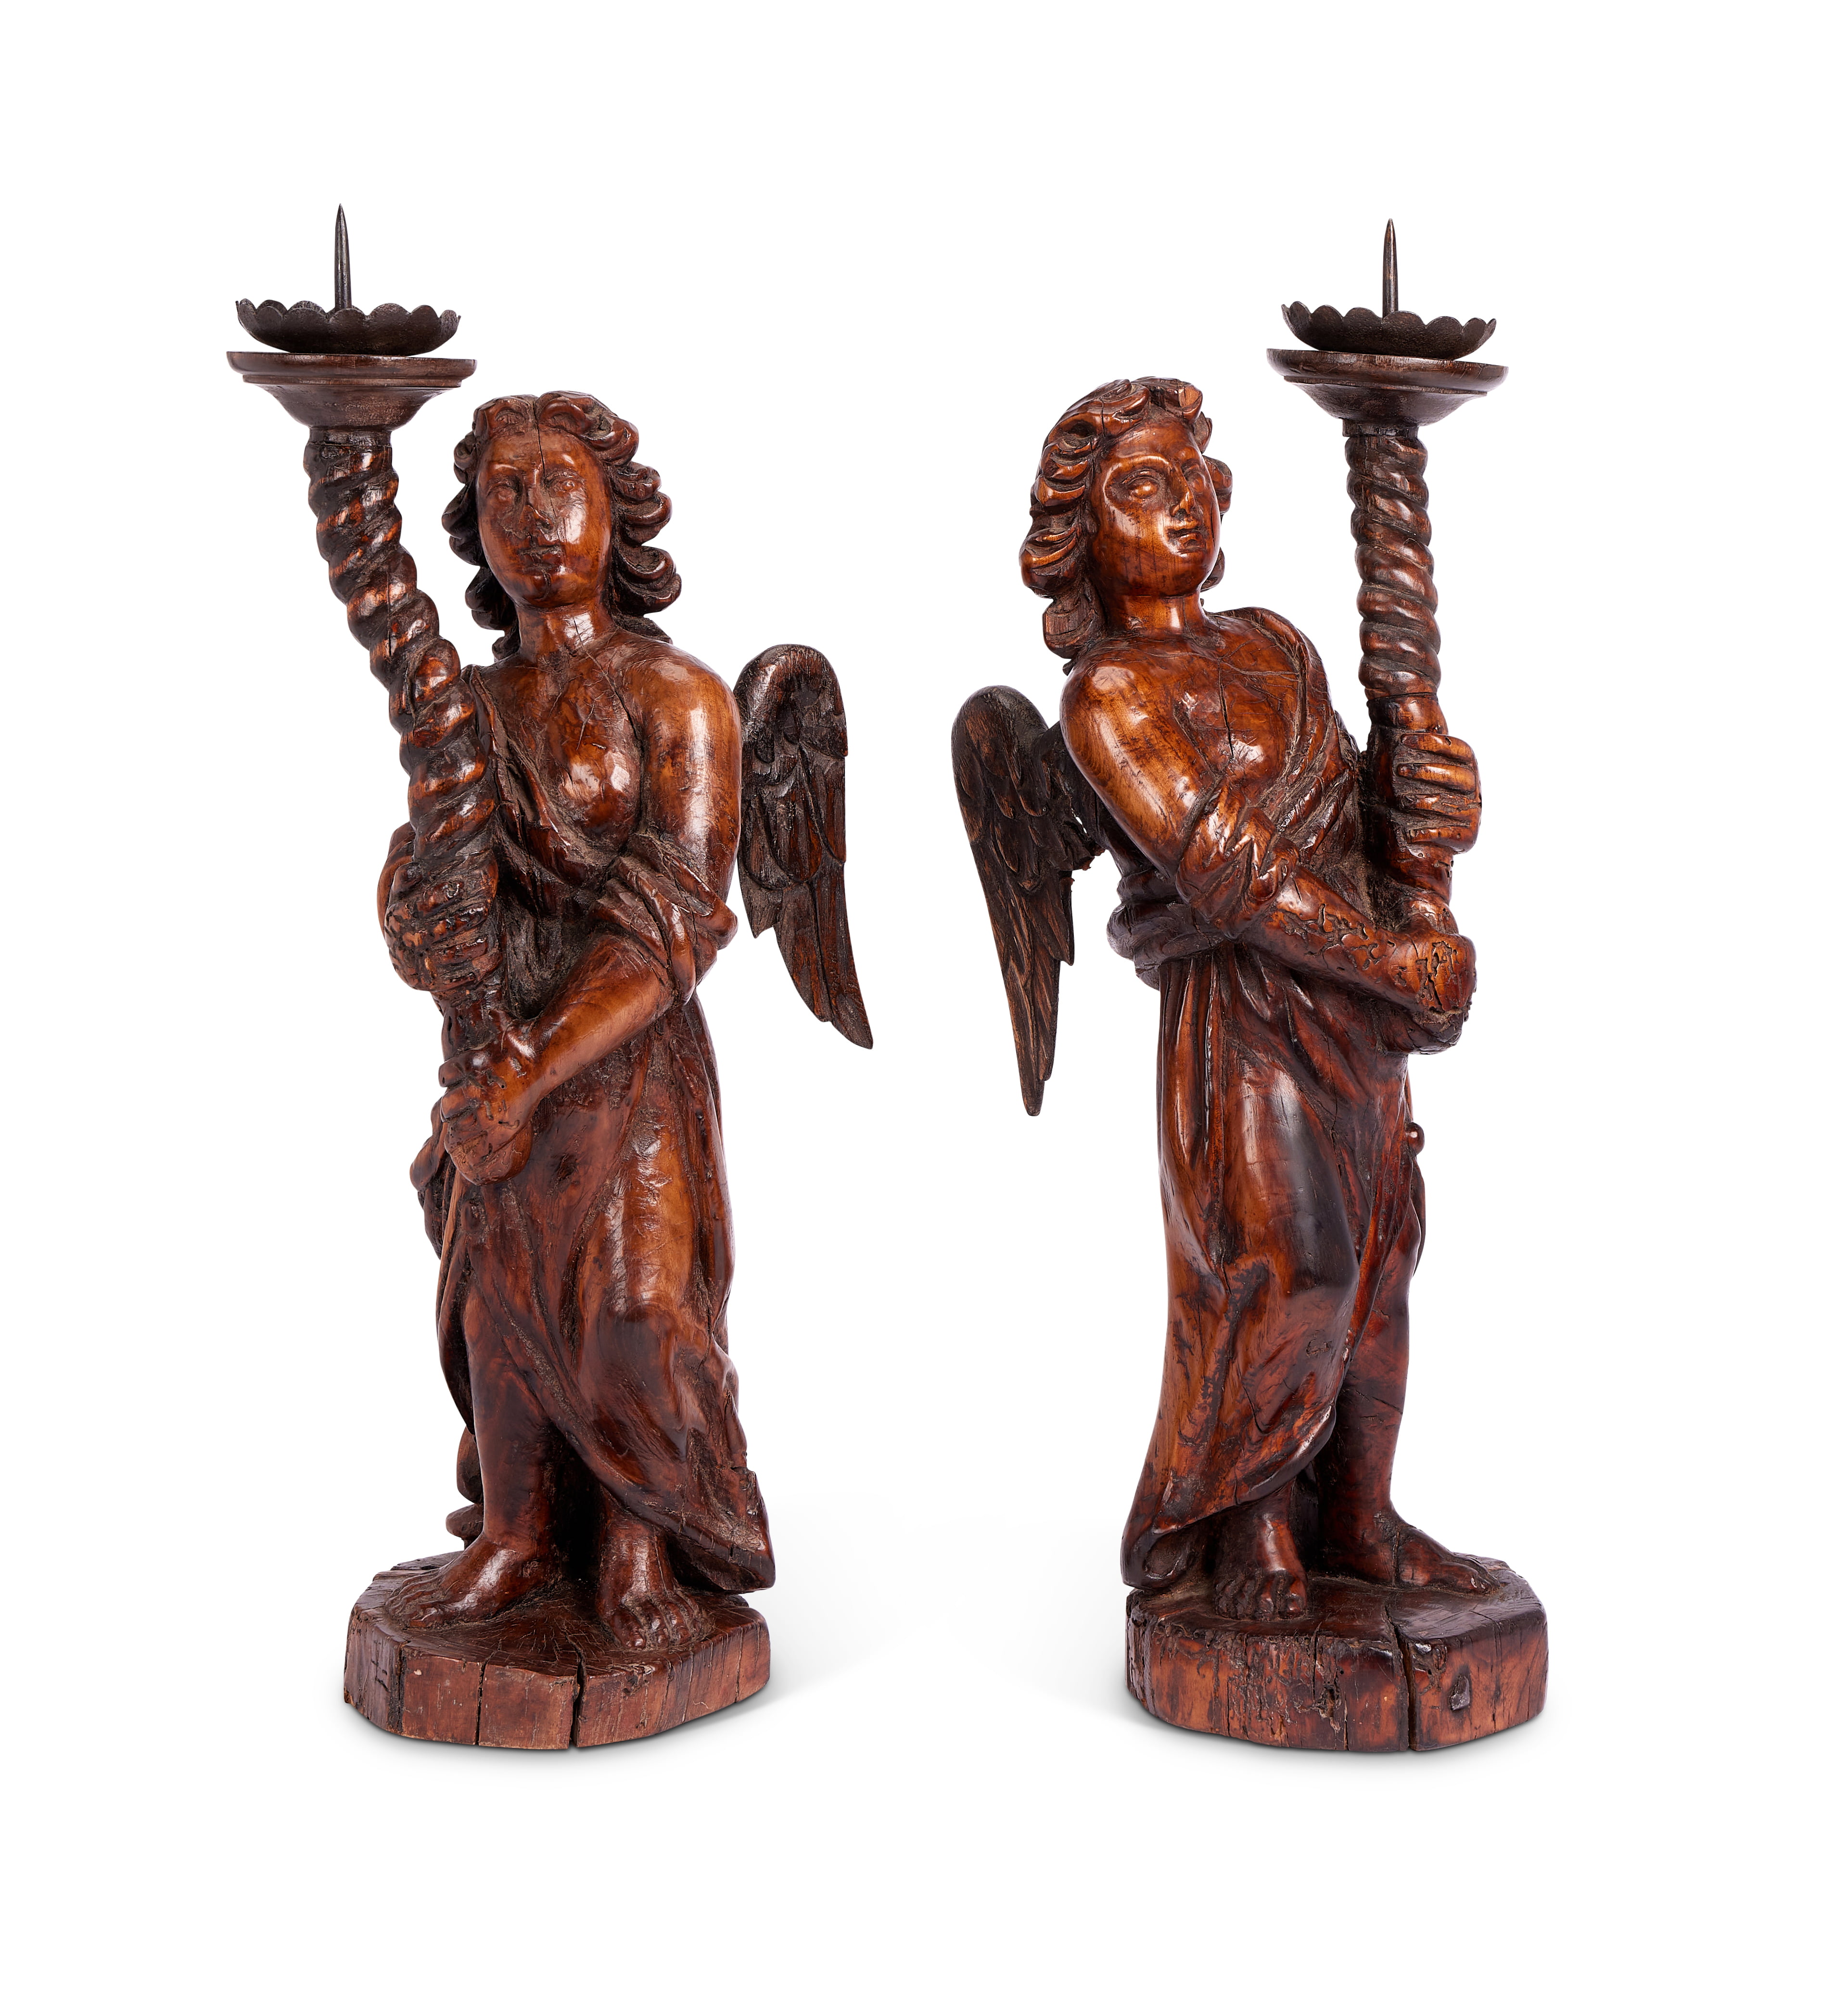 A pair of 17th century Flemish carved walnut pricket candlesticks